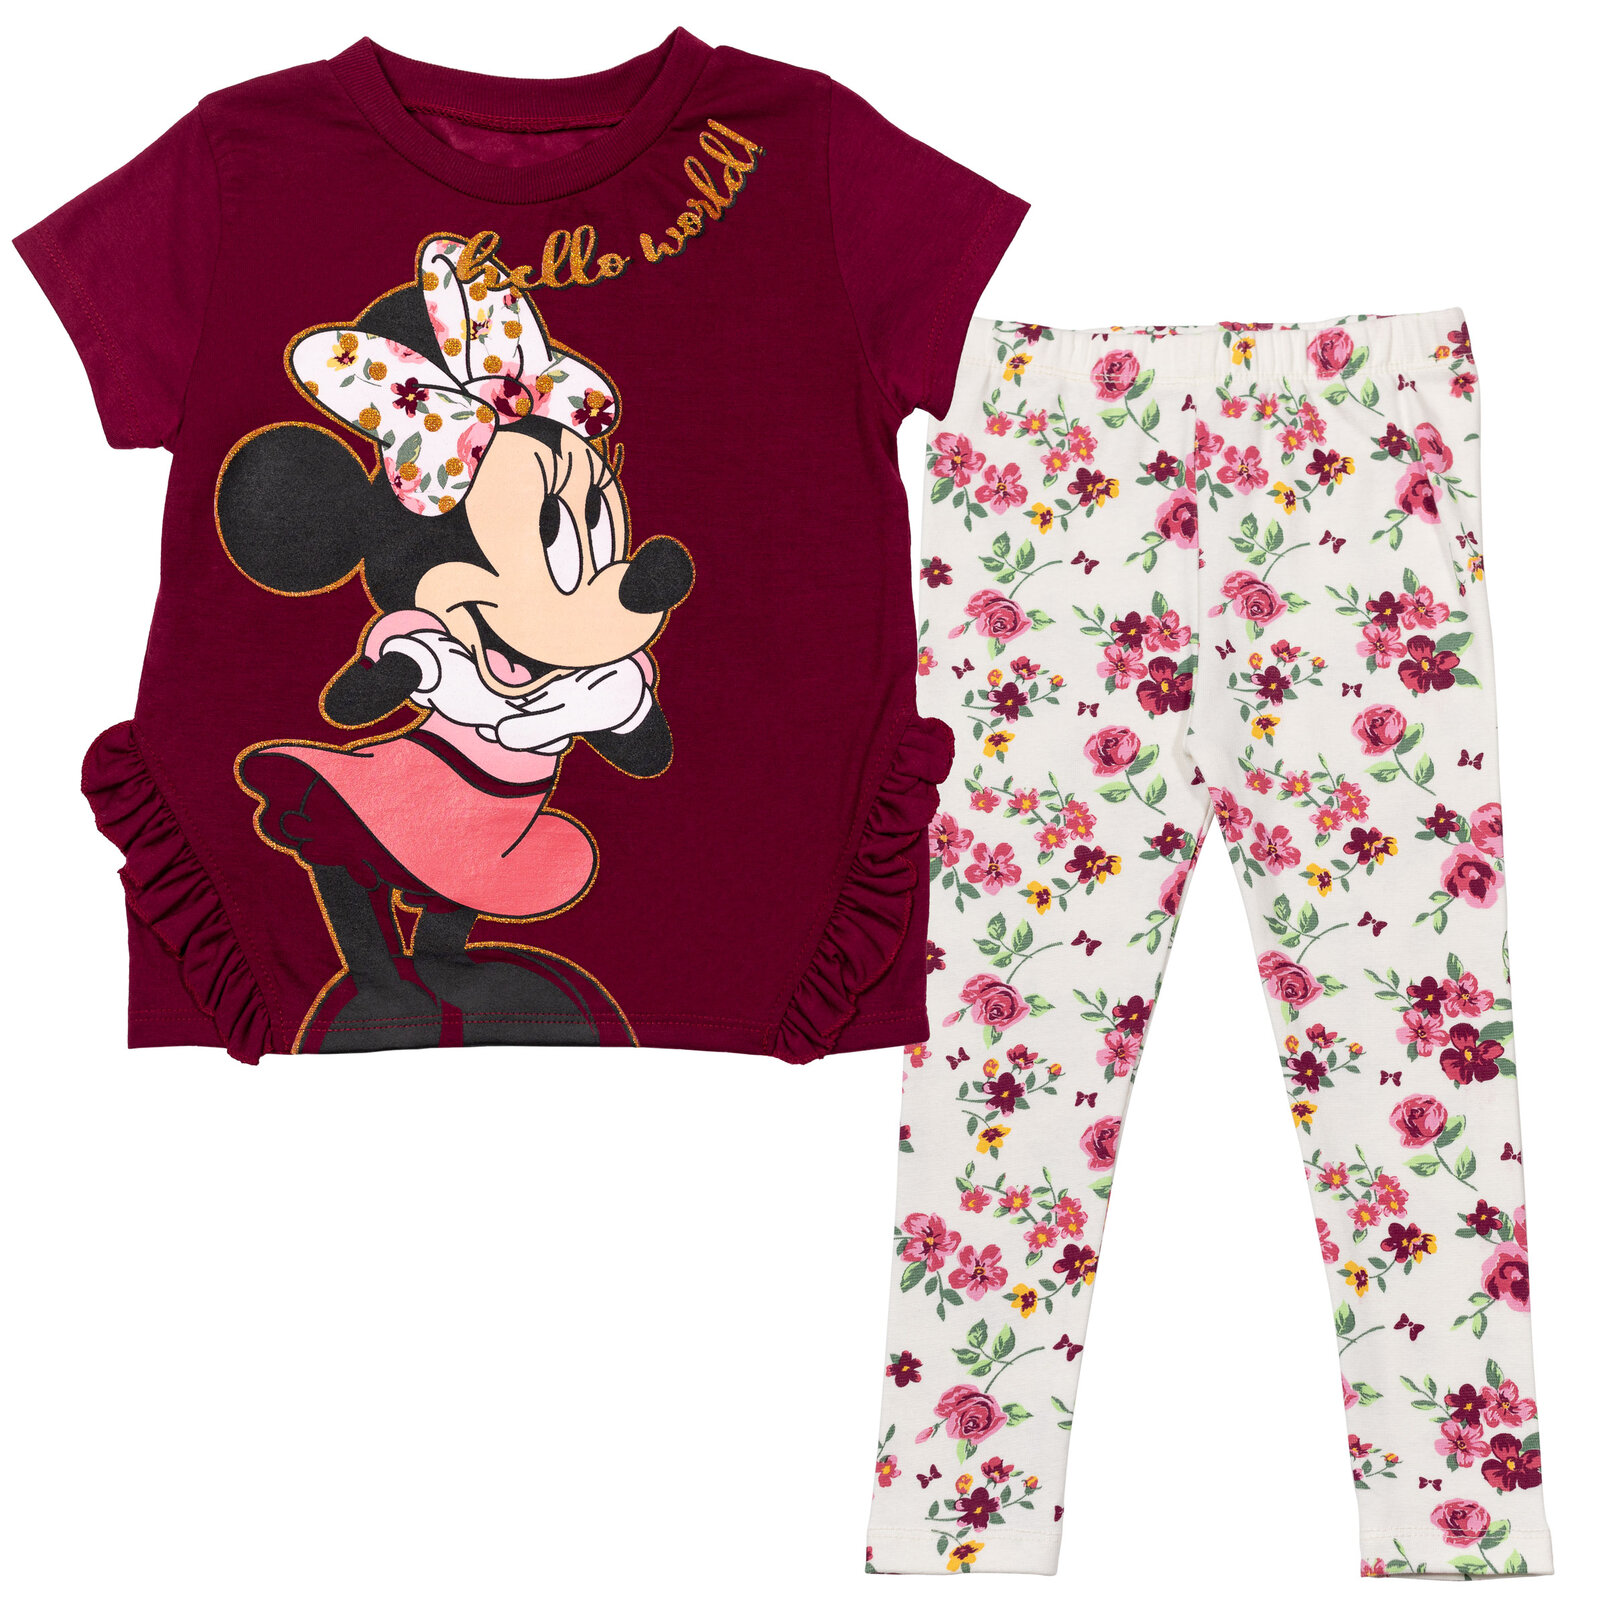 Disney Minnie Mouse Infant Baby Girls T-Shirt and Leggings Outfit Set Infant to Little Kid - image 1 of 5